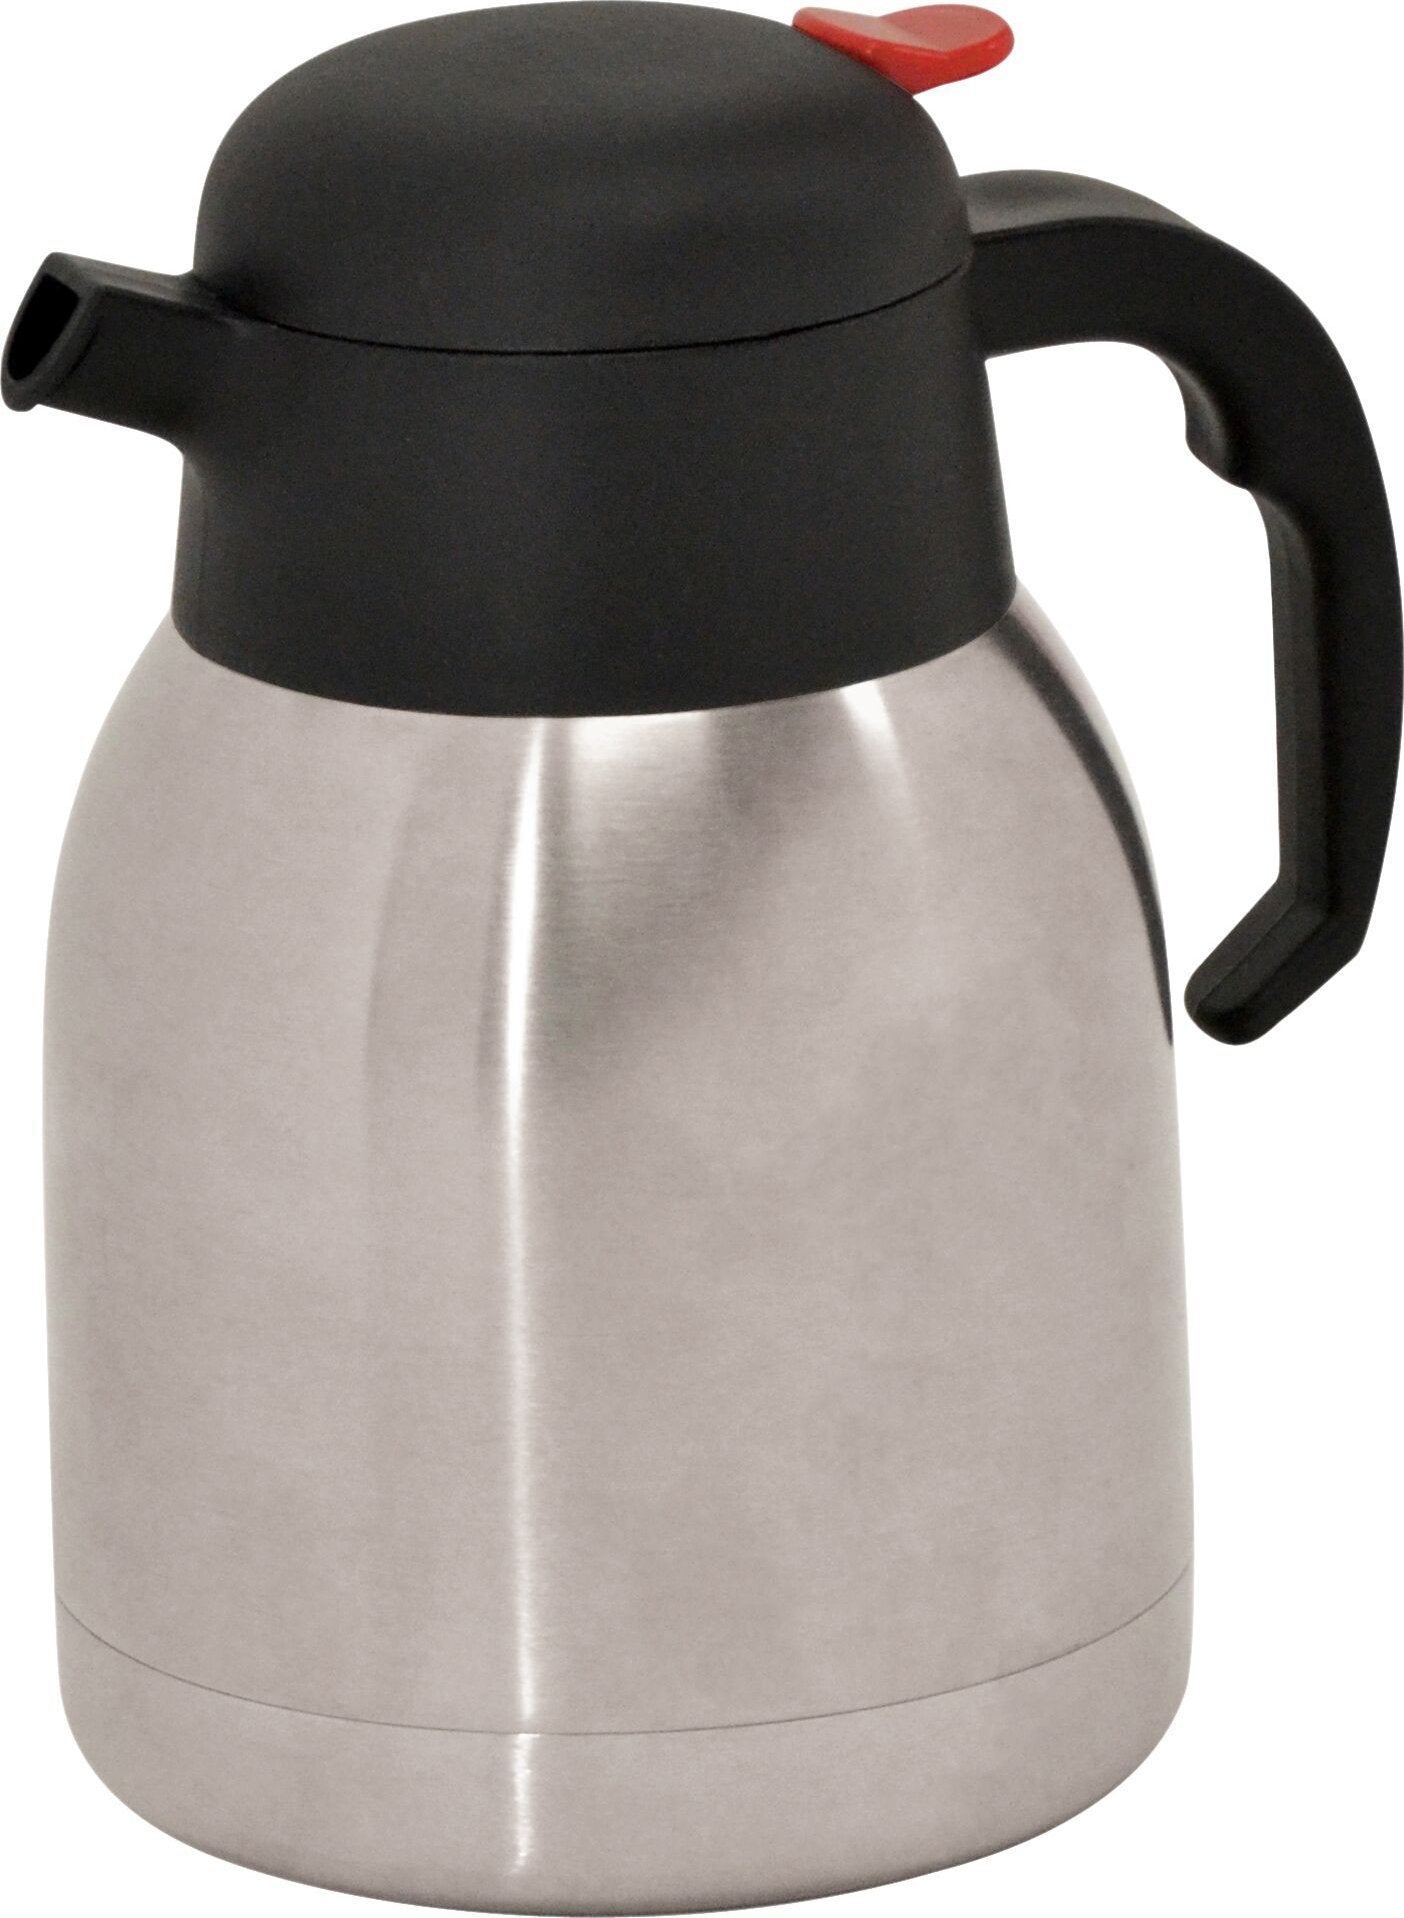 Omcan - 1.2 L Stainless Steel Double Wall Thermal Carafe, 5/cs - 40563